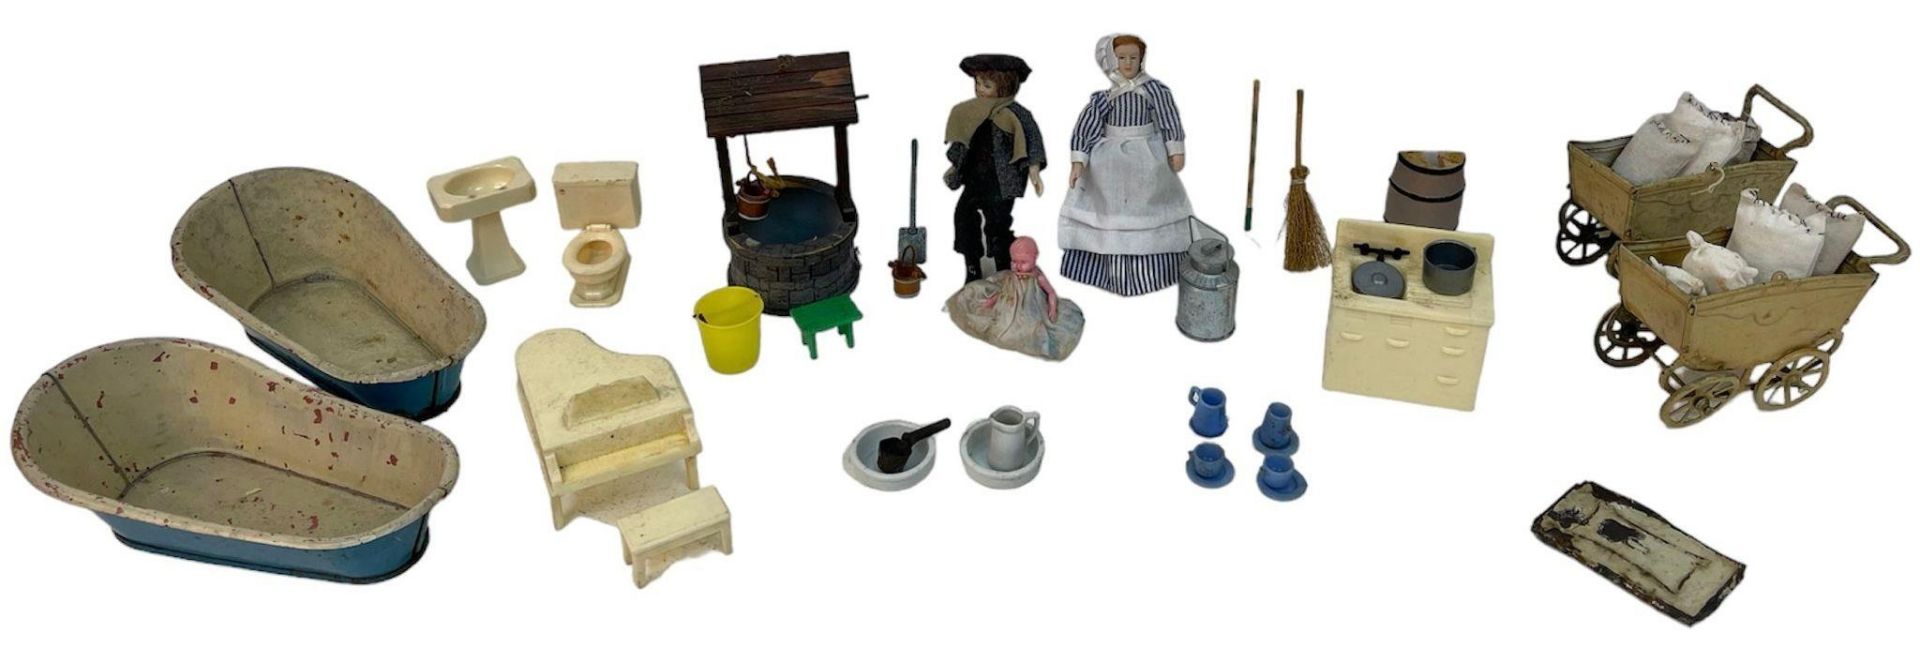 A collection of mixed dollhouse accessories.